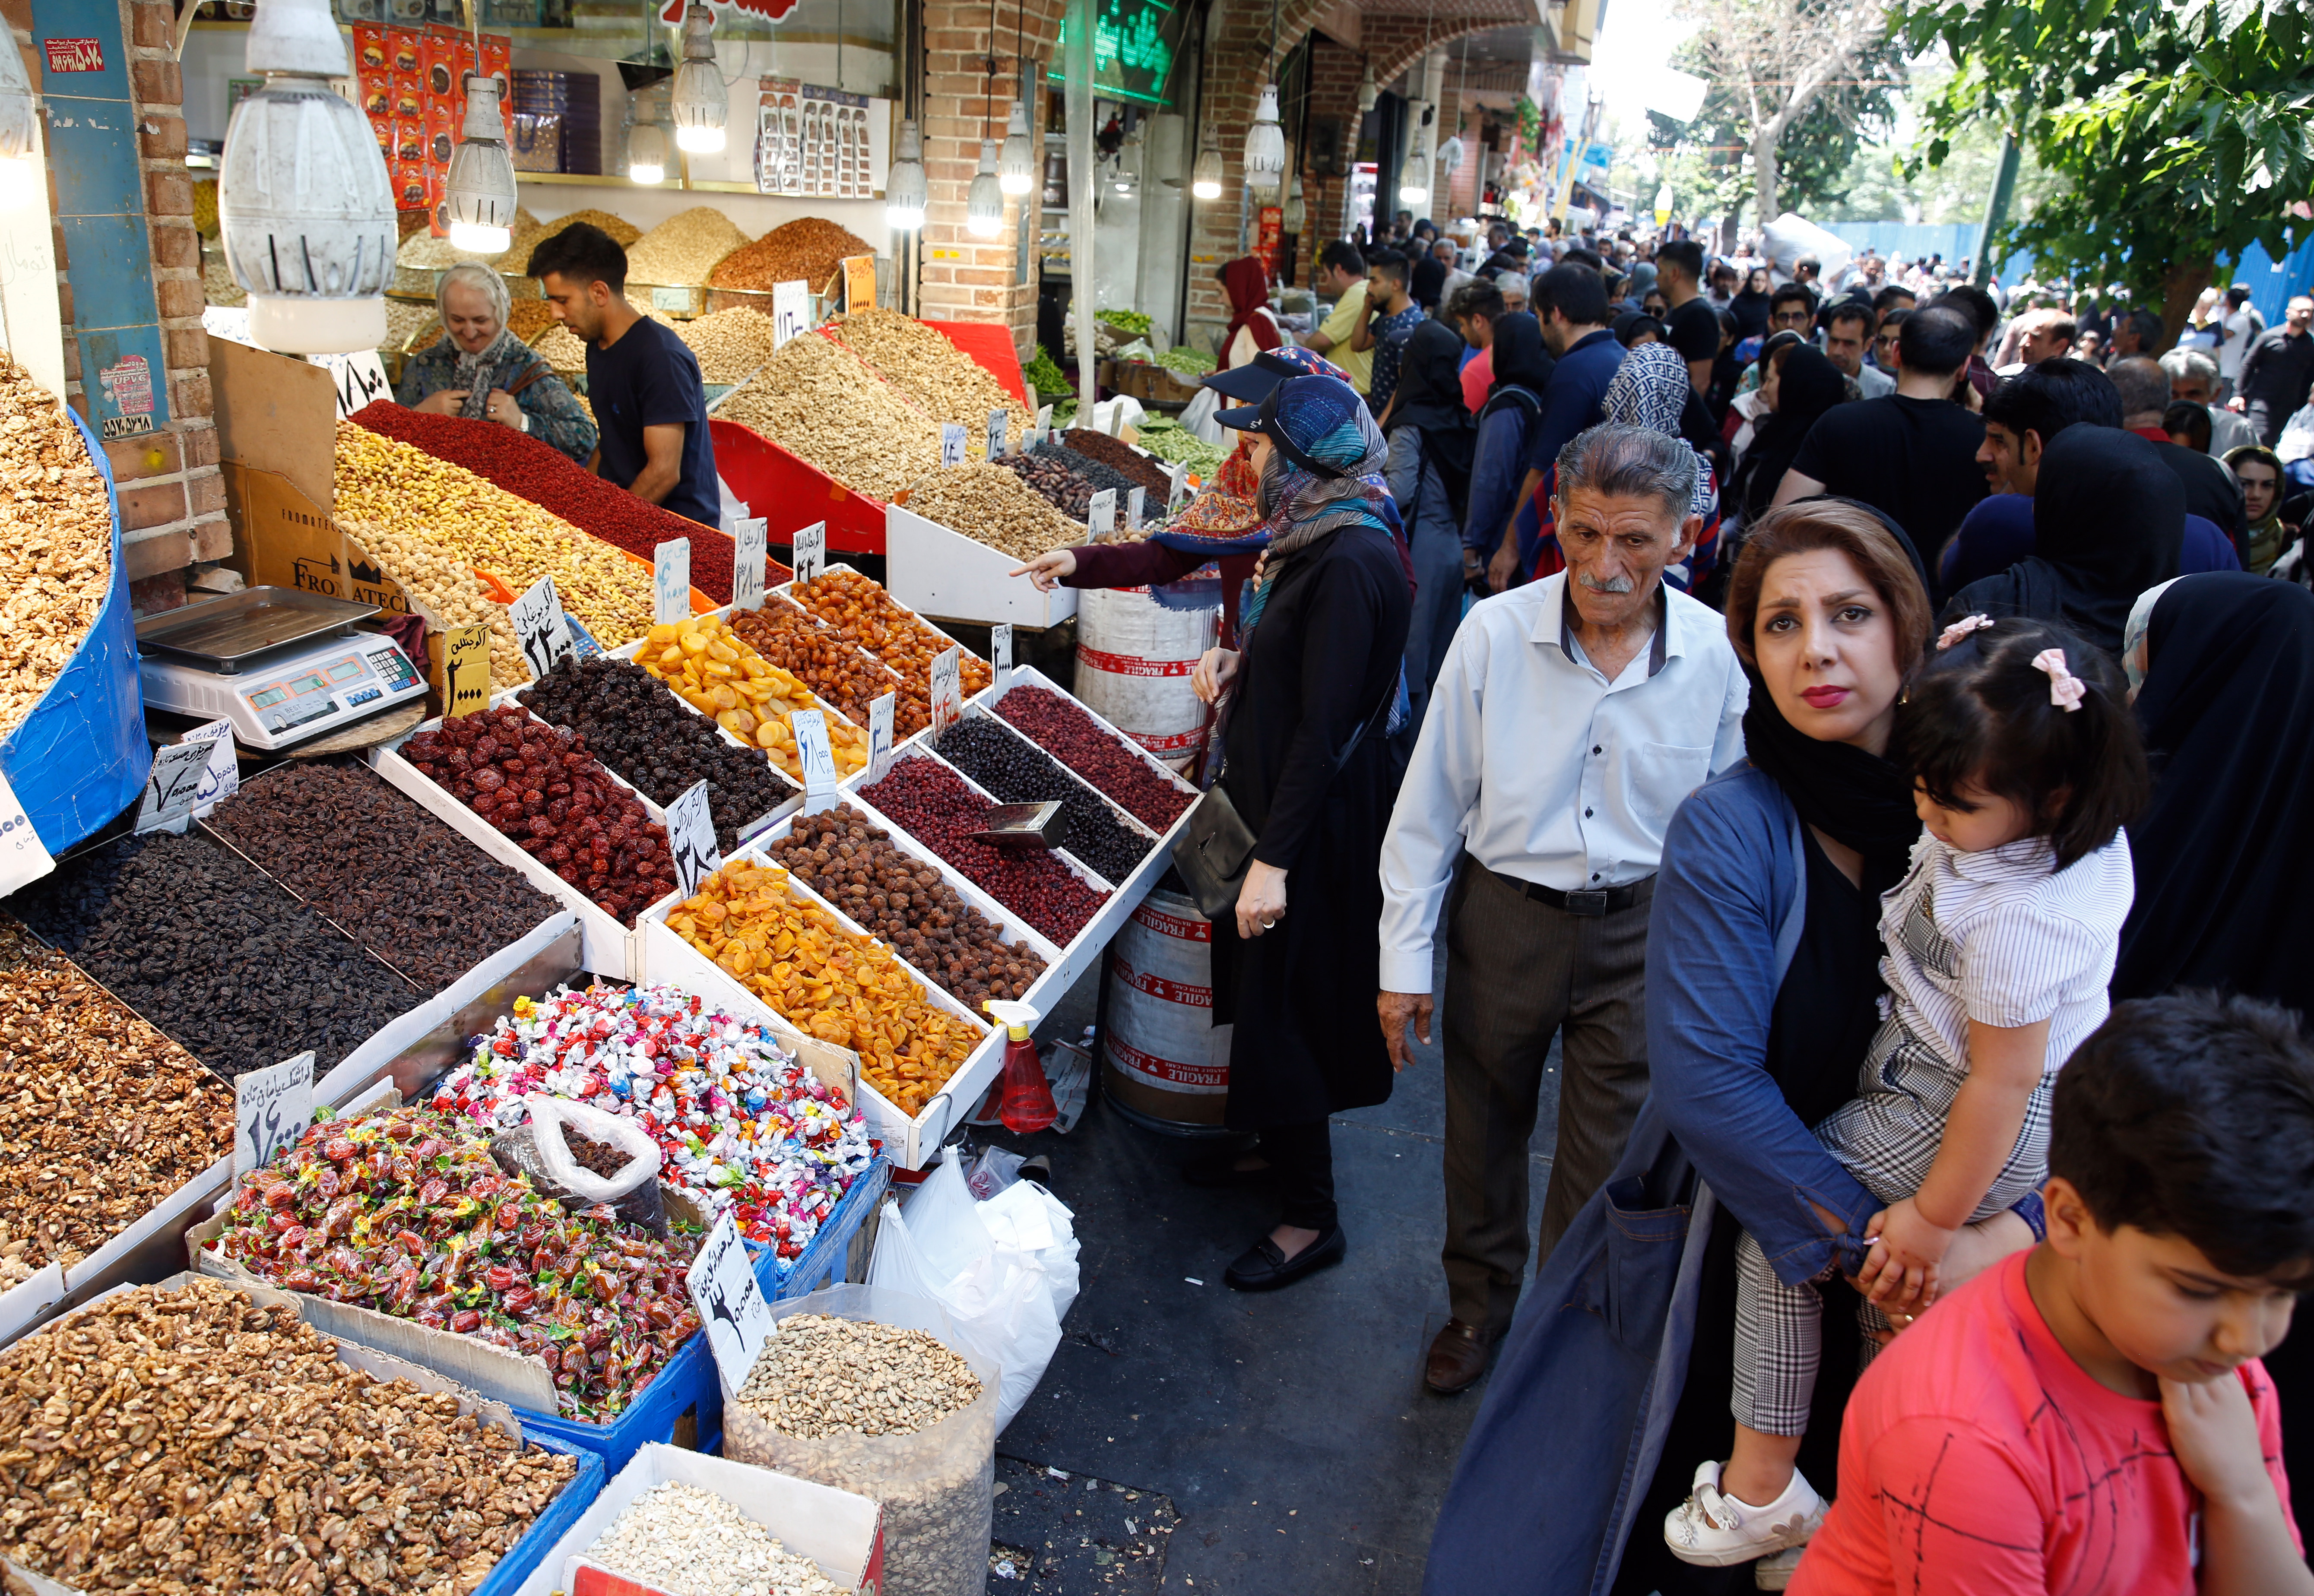 epa07670600 An Iranian woman looks at dry goods displayed at old grand bazaar in Tehran, Iran, 24 June 2019. Iranian media has reported that as Iranians suffer from the sanctions and economic crisis which has affected their lives, US administration is to announce further sanctions against Iran in coming hours. The new sanctions are coming after a US drone was shot down by Iranian forces on 20 January 2019.  EPA/ABEDIN TAHERKENAREH